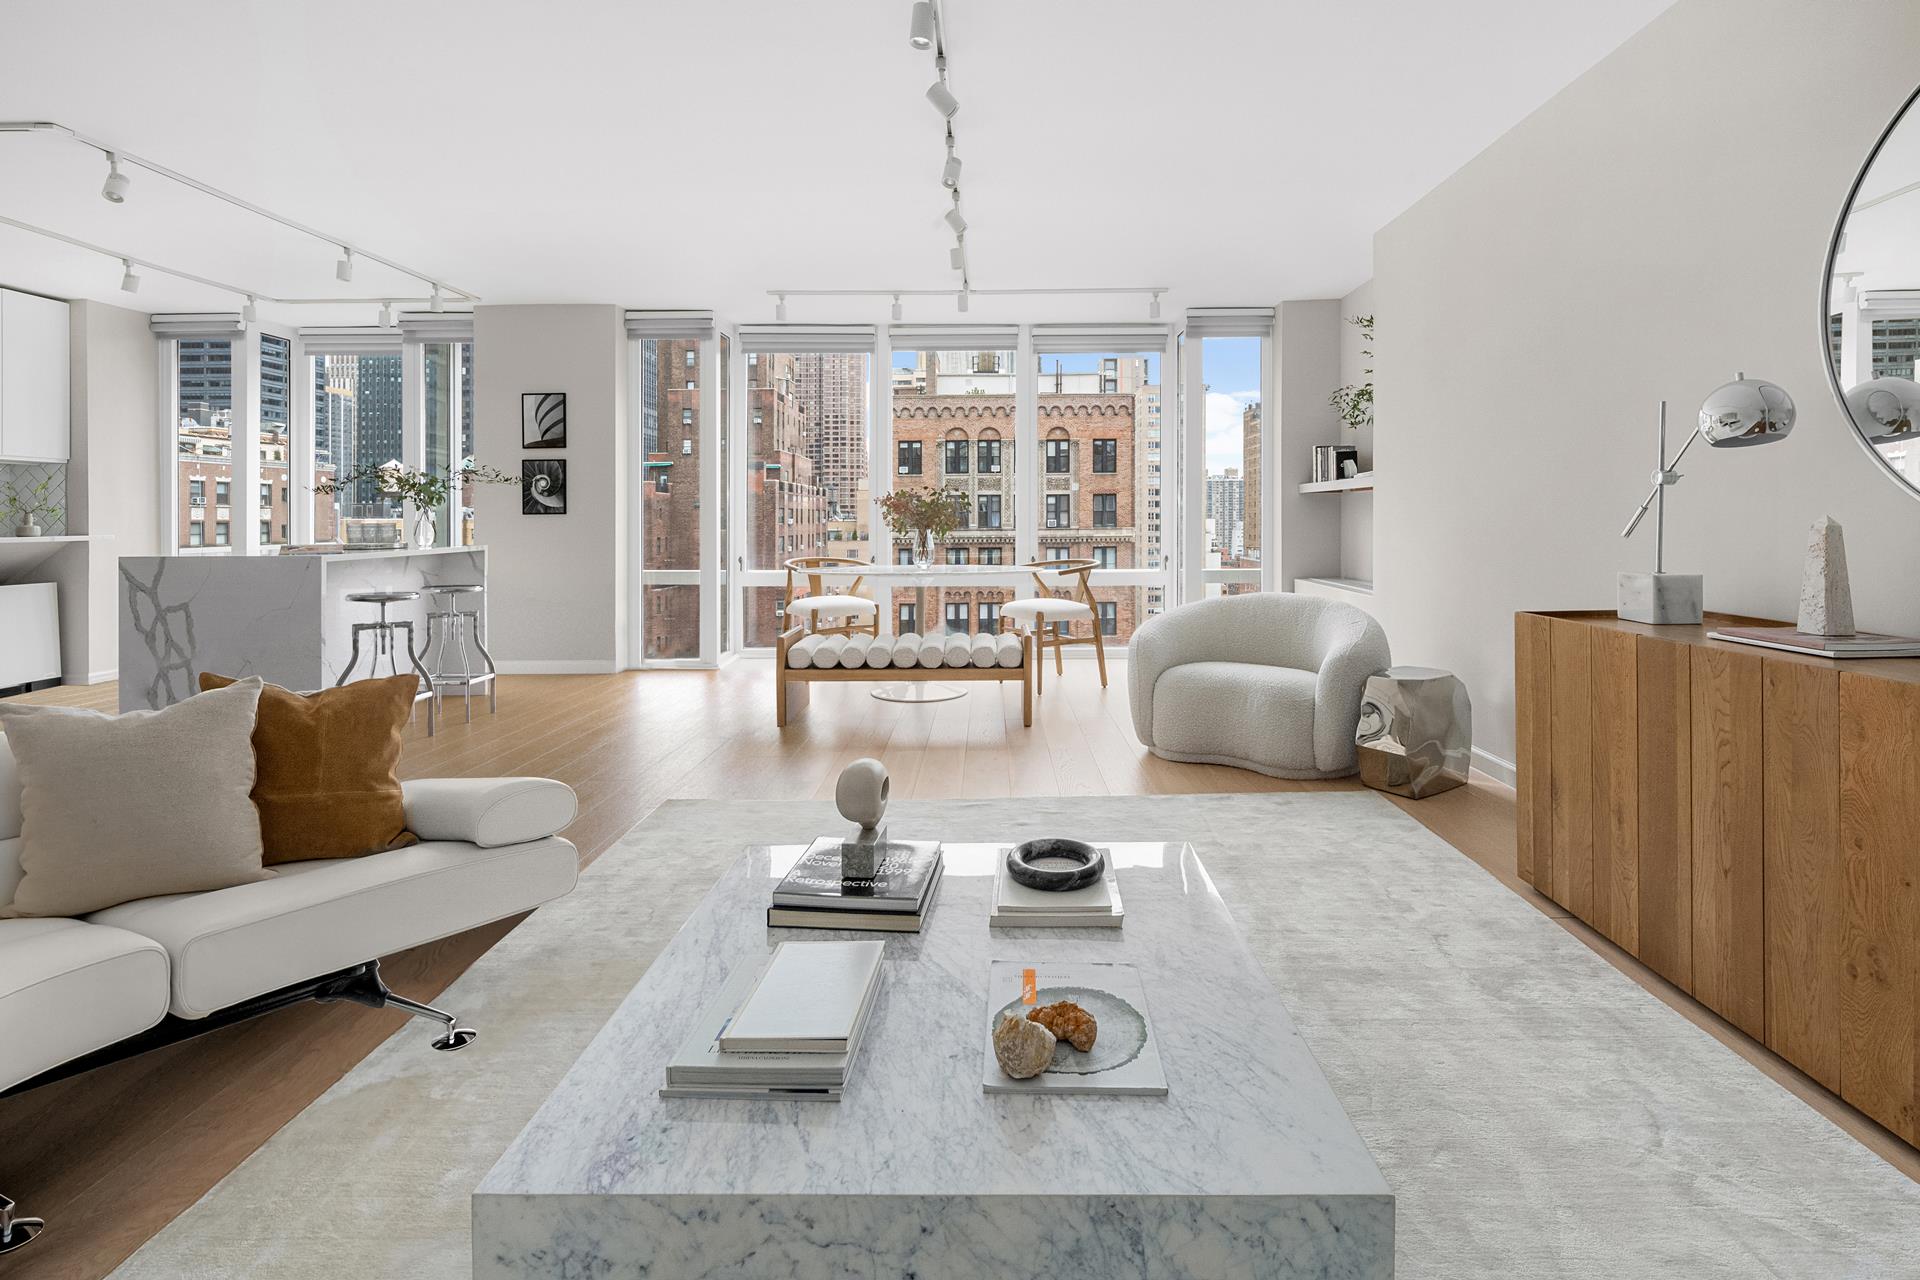 52 Park Avenue 15thfl, Murray Hill, Midtown East, NYC - 2 Bedrooms  
2 Bathrooms  
4 Rooms - 